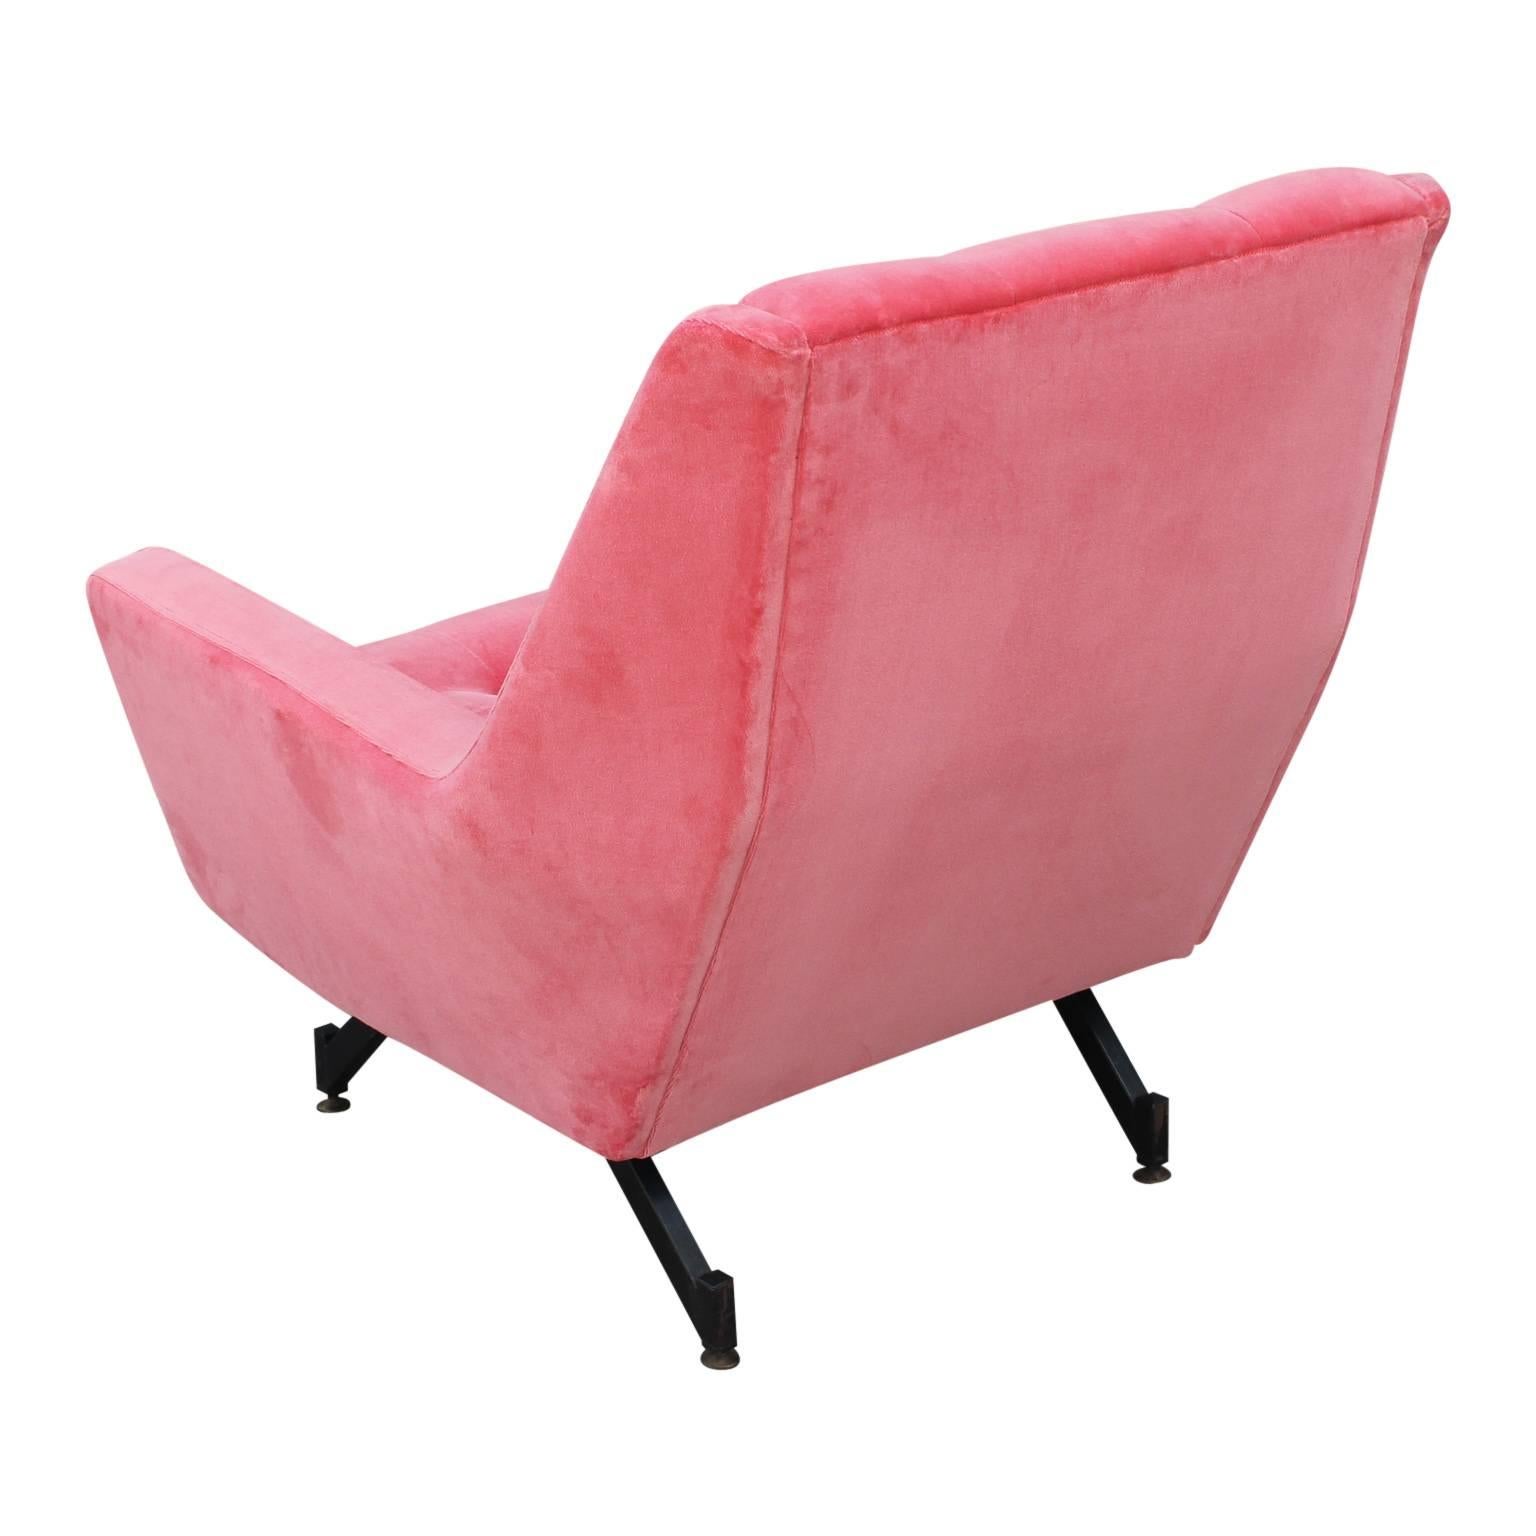 Mid-Century Modern Pair of Italian Modern Tufted Lounge Chairs in Coral Pink Velvet Adjustable Legs